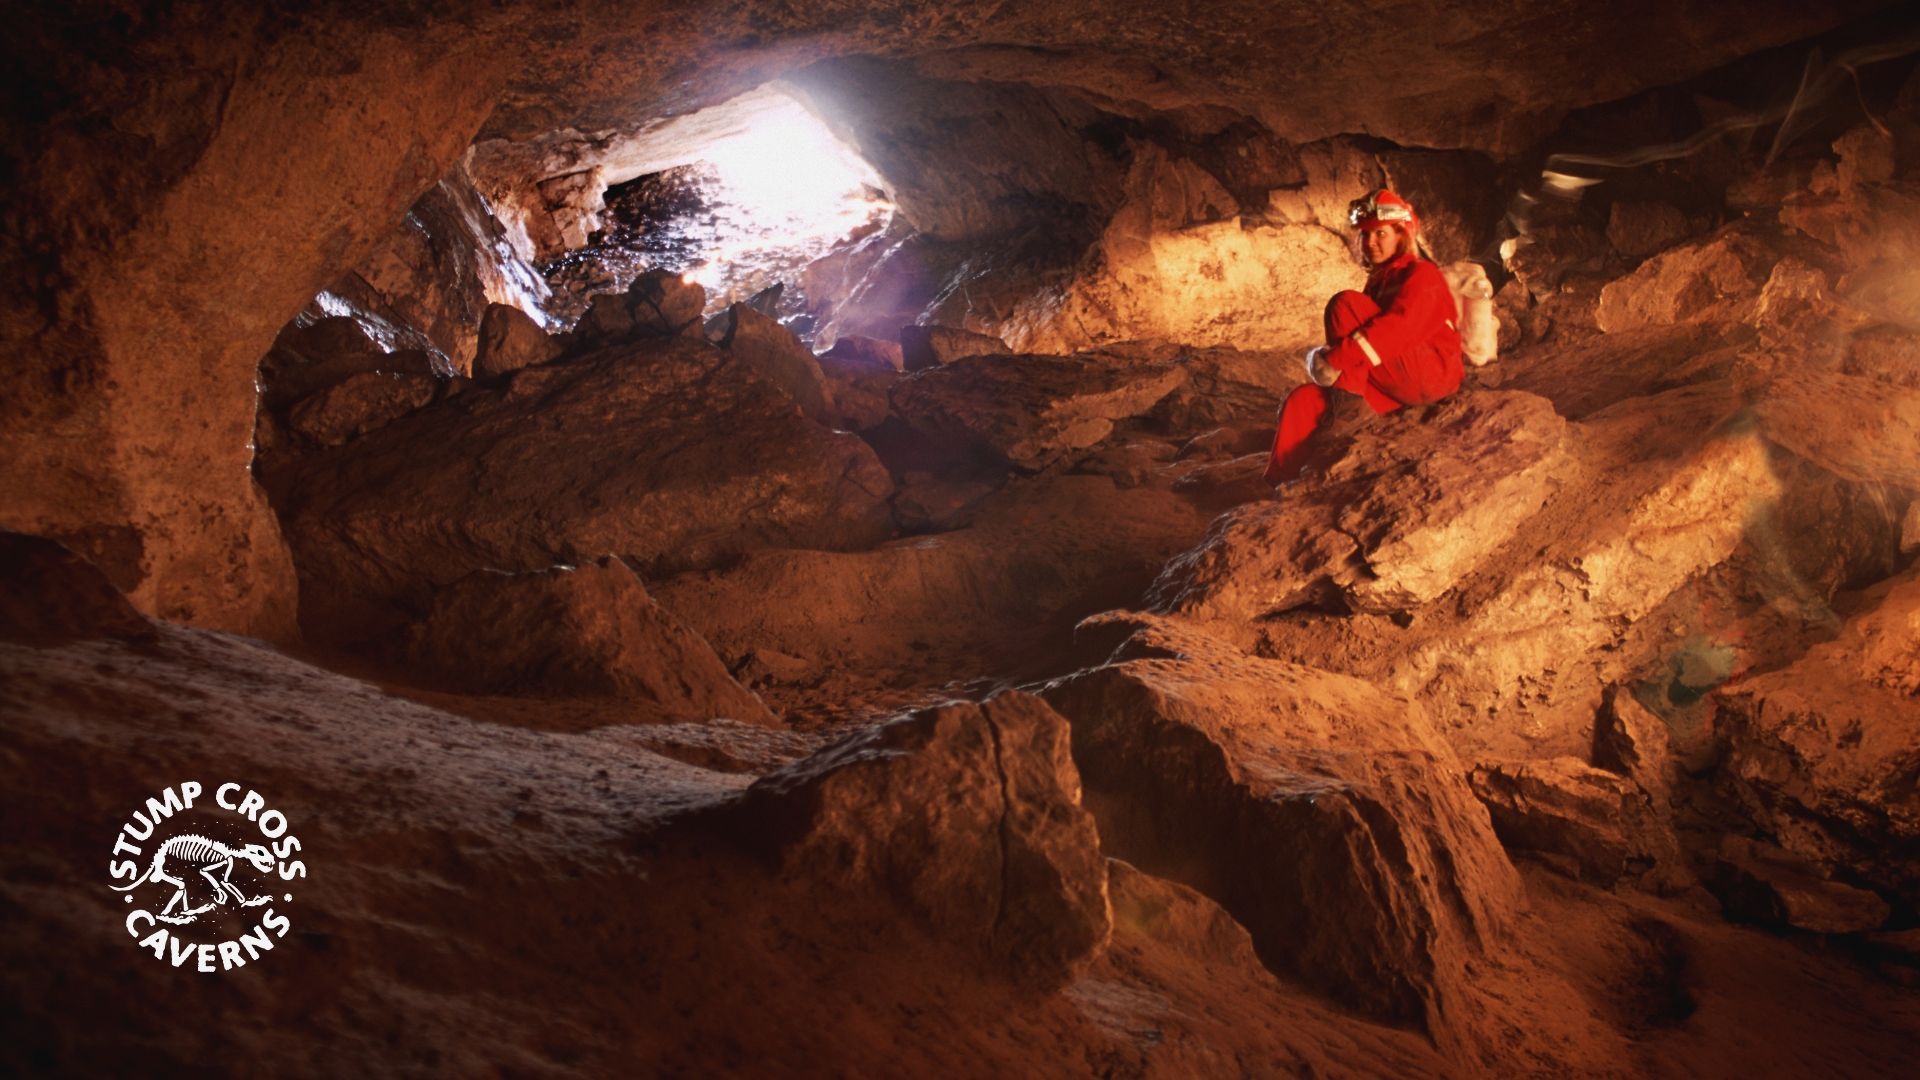 Curious about caving? Meet some real rock stars who changed the world of potholing for the better.
